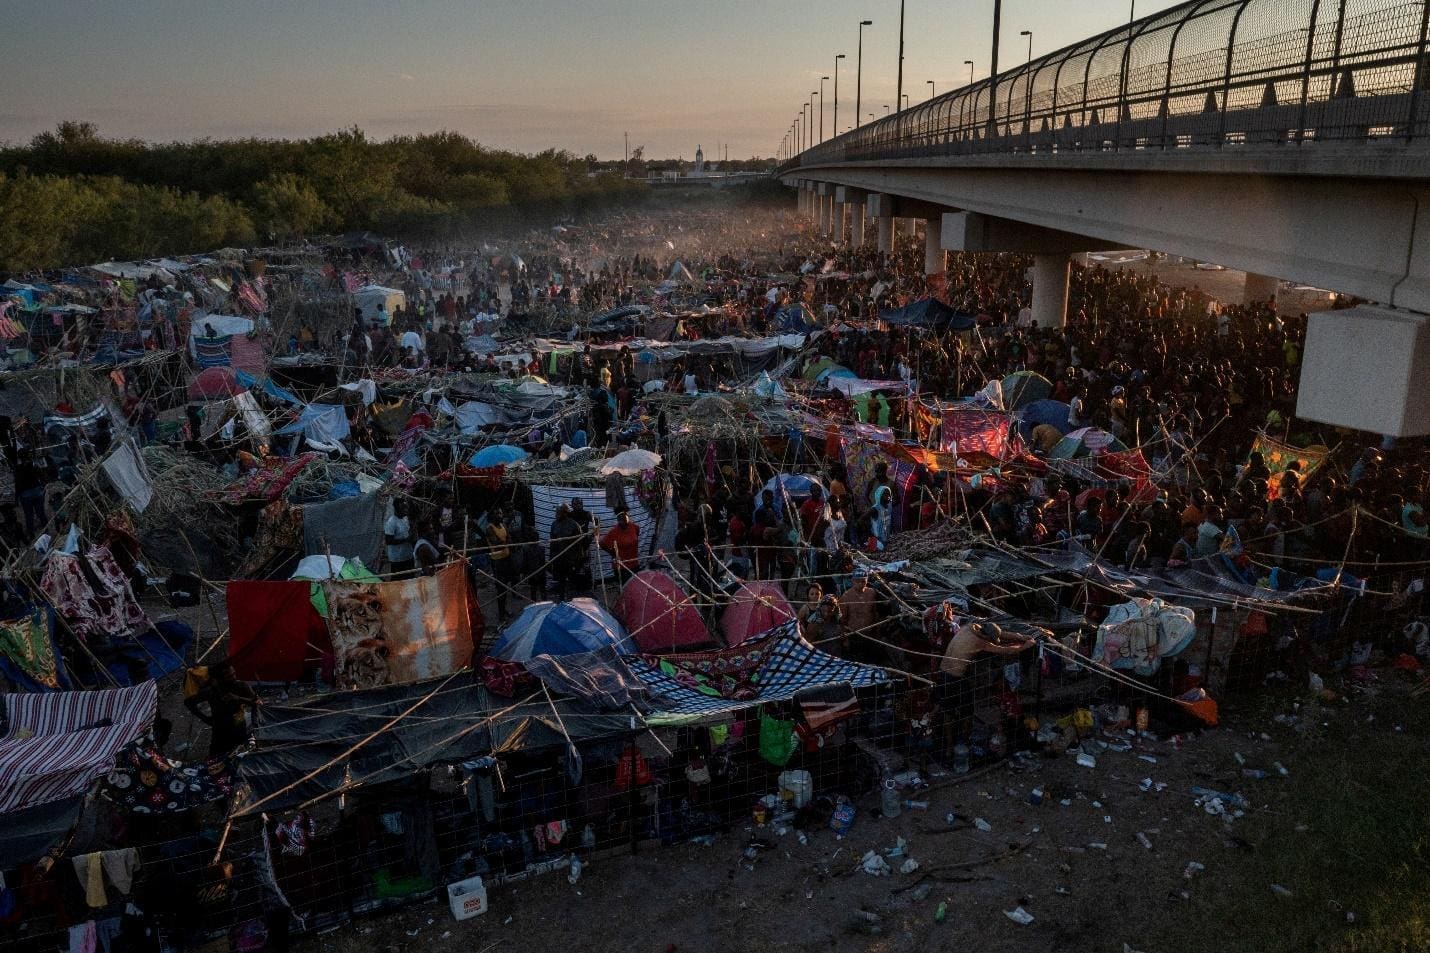 Migrants take shelter along the Del Rio International Bridge at sunset as they await to be processed after crossing the Rio Grande river into the U.S. from Ciudad Acuna in Del Rio, Texas, U.S. September 19, 2021. REUTERS/Adrees Latif